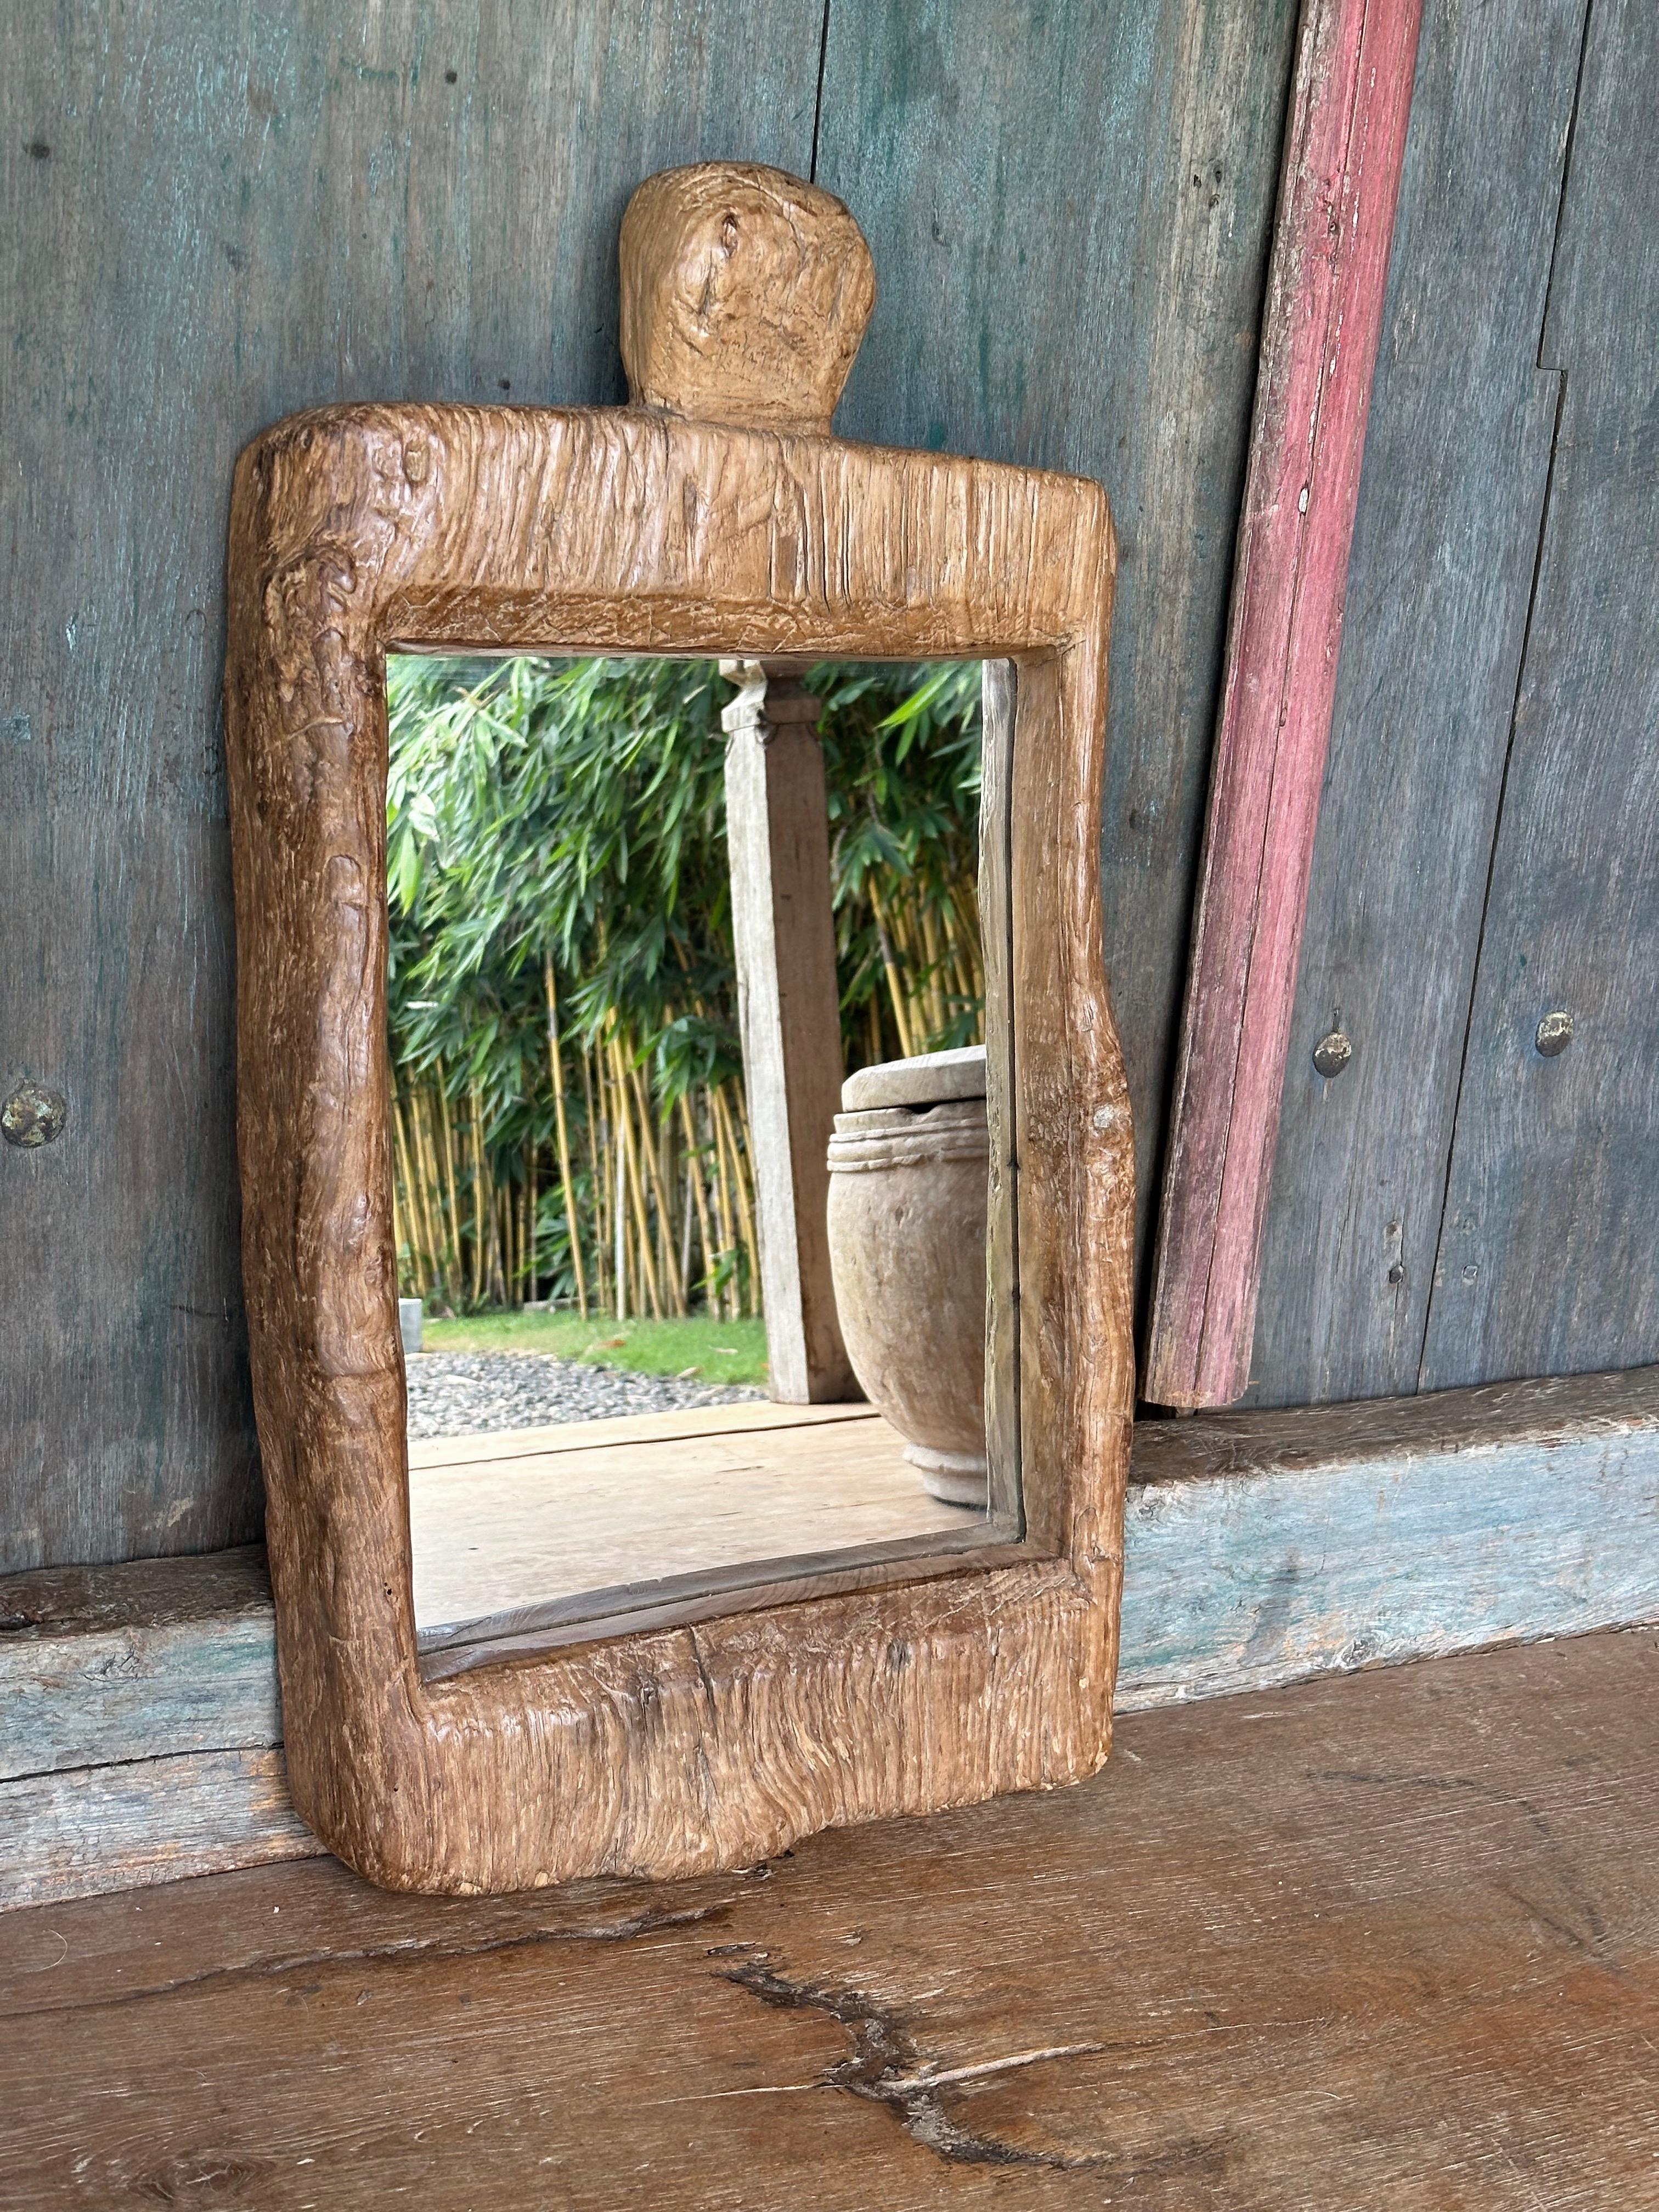 A wonderfully unique mirror crafted from wood sourced from an antique, solid teak wood Lesung. Lesungs are rice mortars found on the island of java used to remove rice husks. The wood used for this mirror was sourced from the top side of the Lesung,